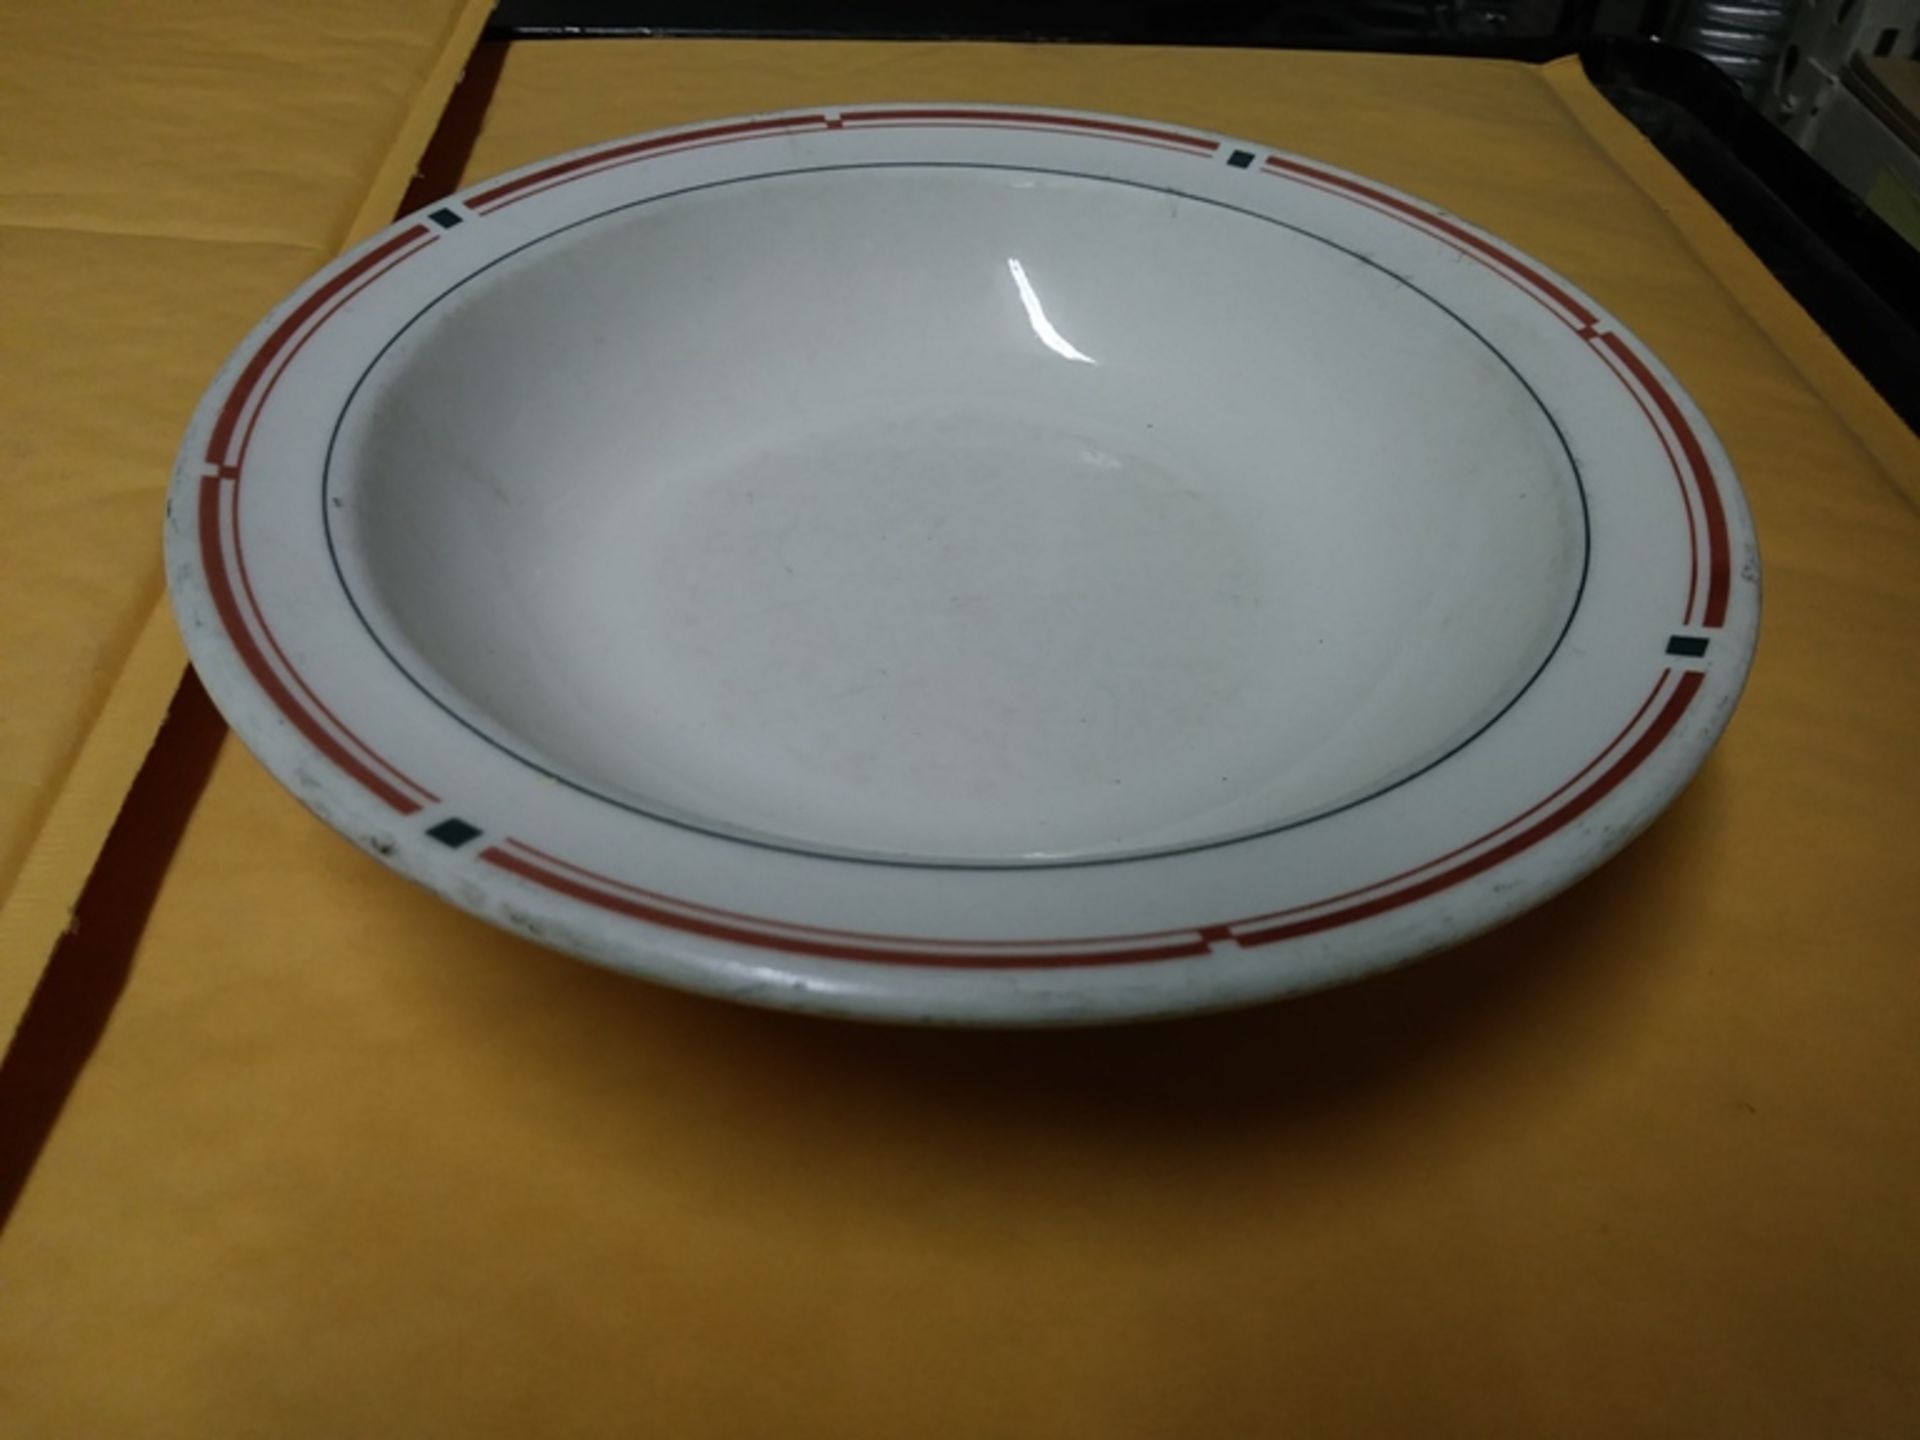 NEW 7.5" BUFFALO (00-3A) 8.5" BOWL (INCLUDES QTY: 125)